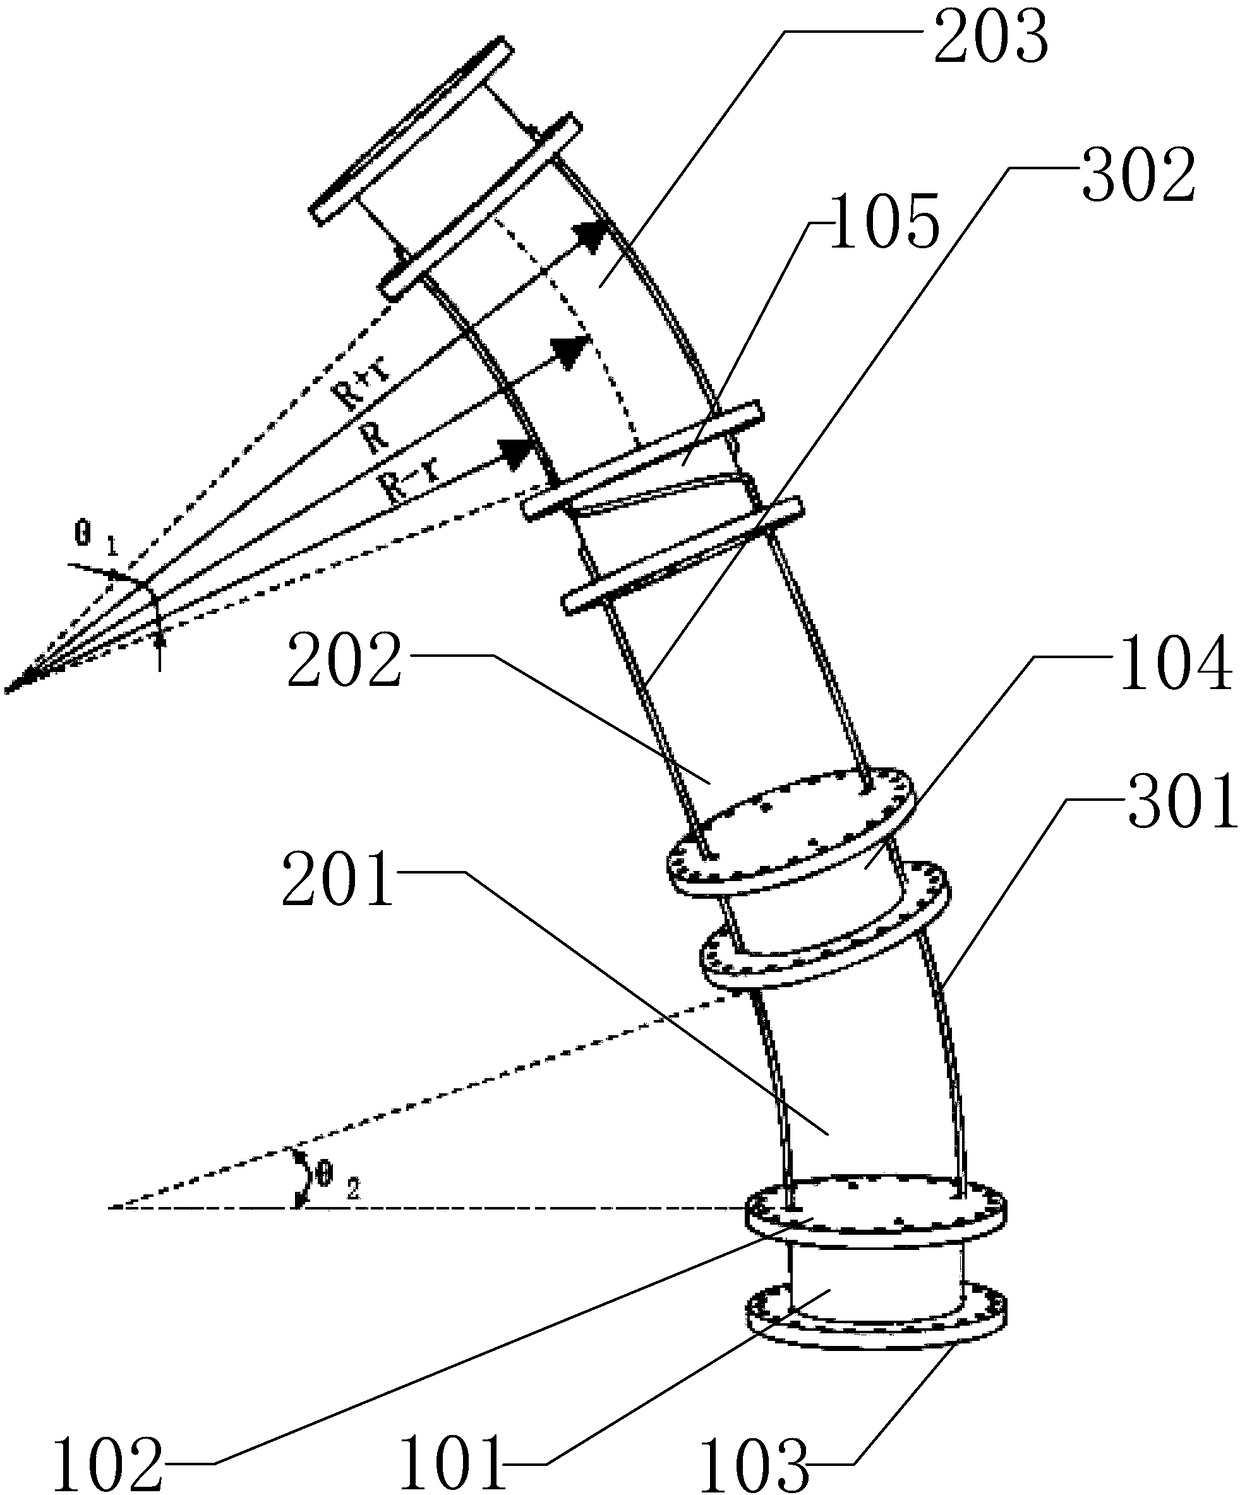 Double-degree-of-freedom linkage rope-driven joint group of flexible mechanical arm